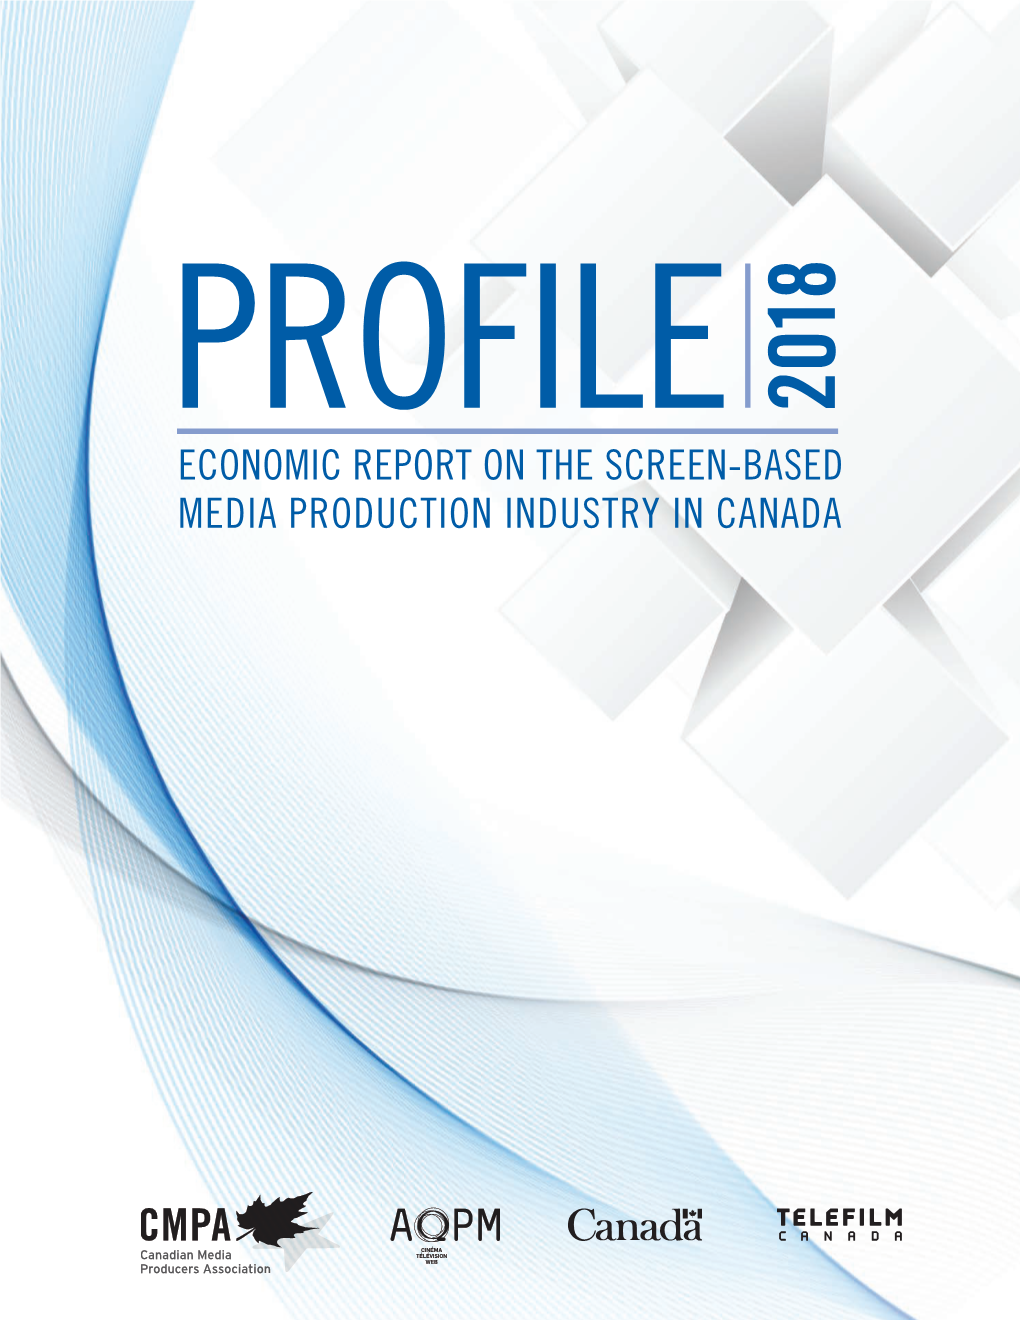 Economic Report on the Screen-Based Media Production Industry in Canada